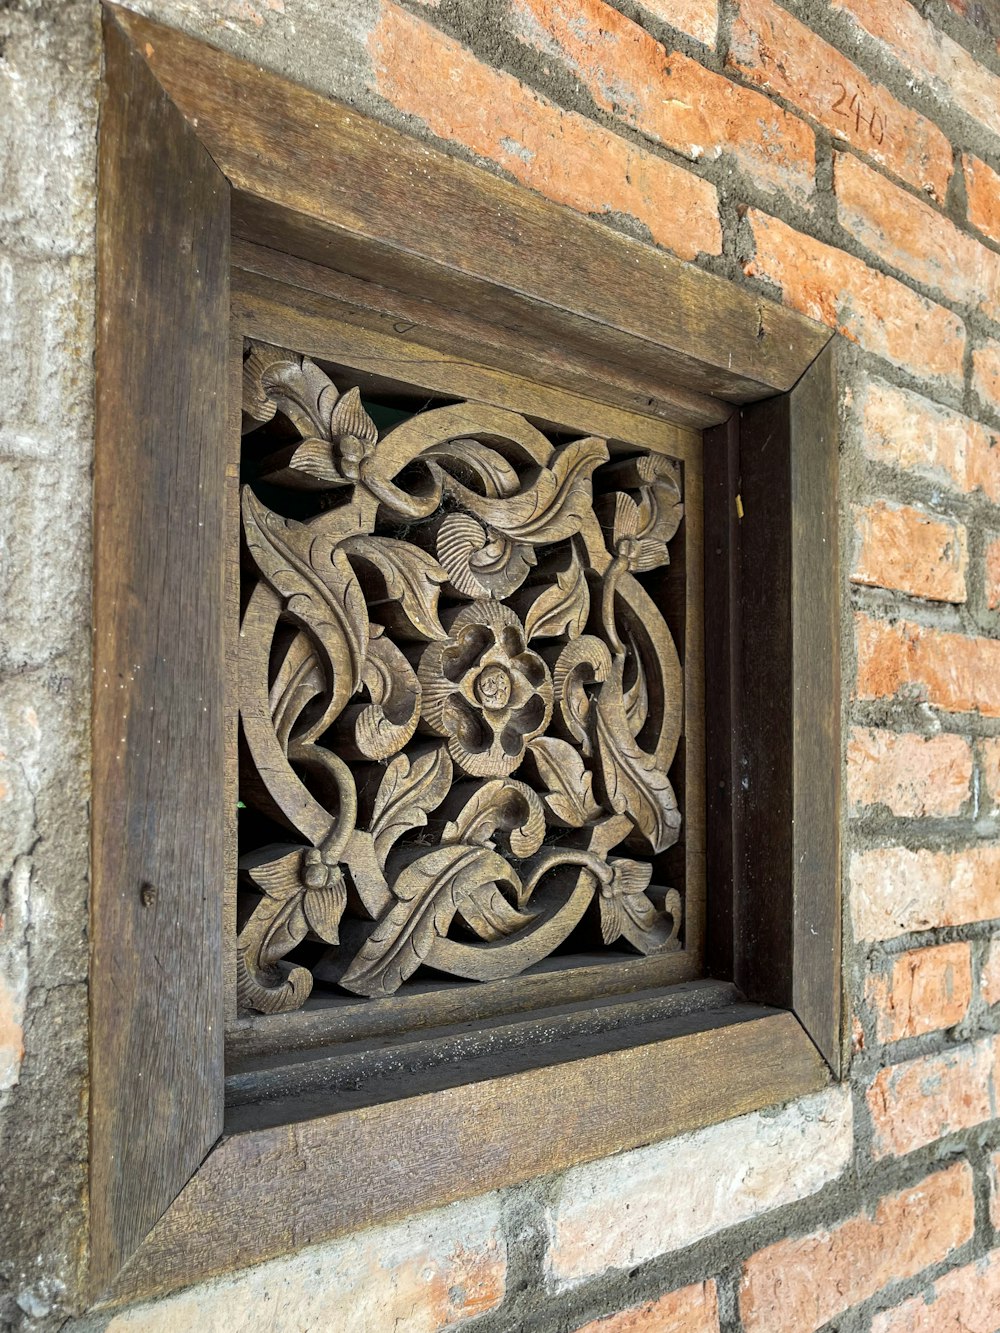 a decorative wooden window in a brick wall